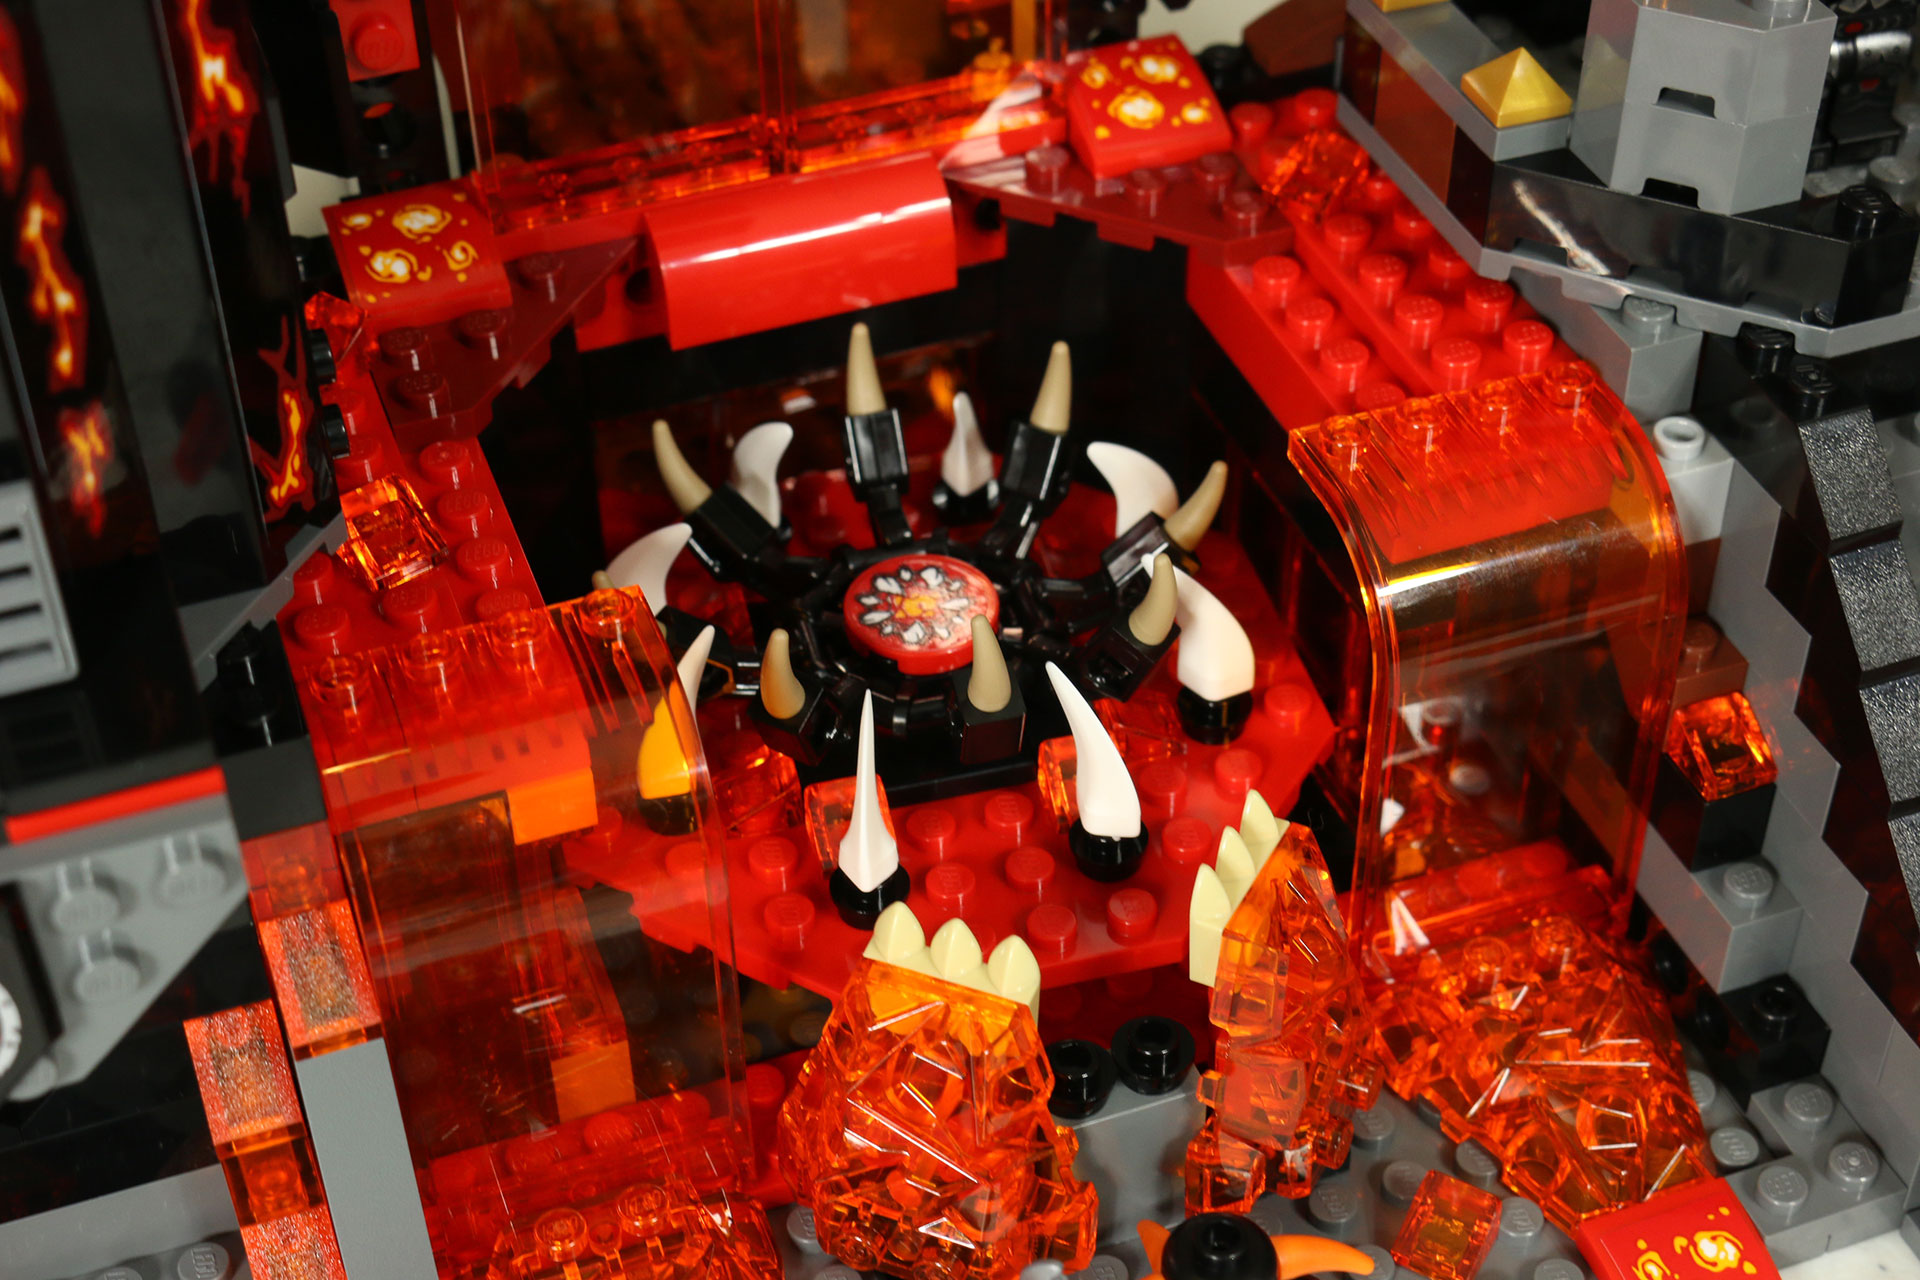 Toy Time Builds LEGO Nexo Knights’ Volcano Lair